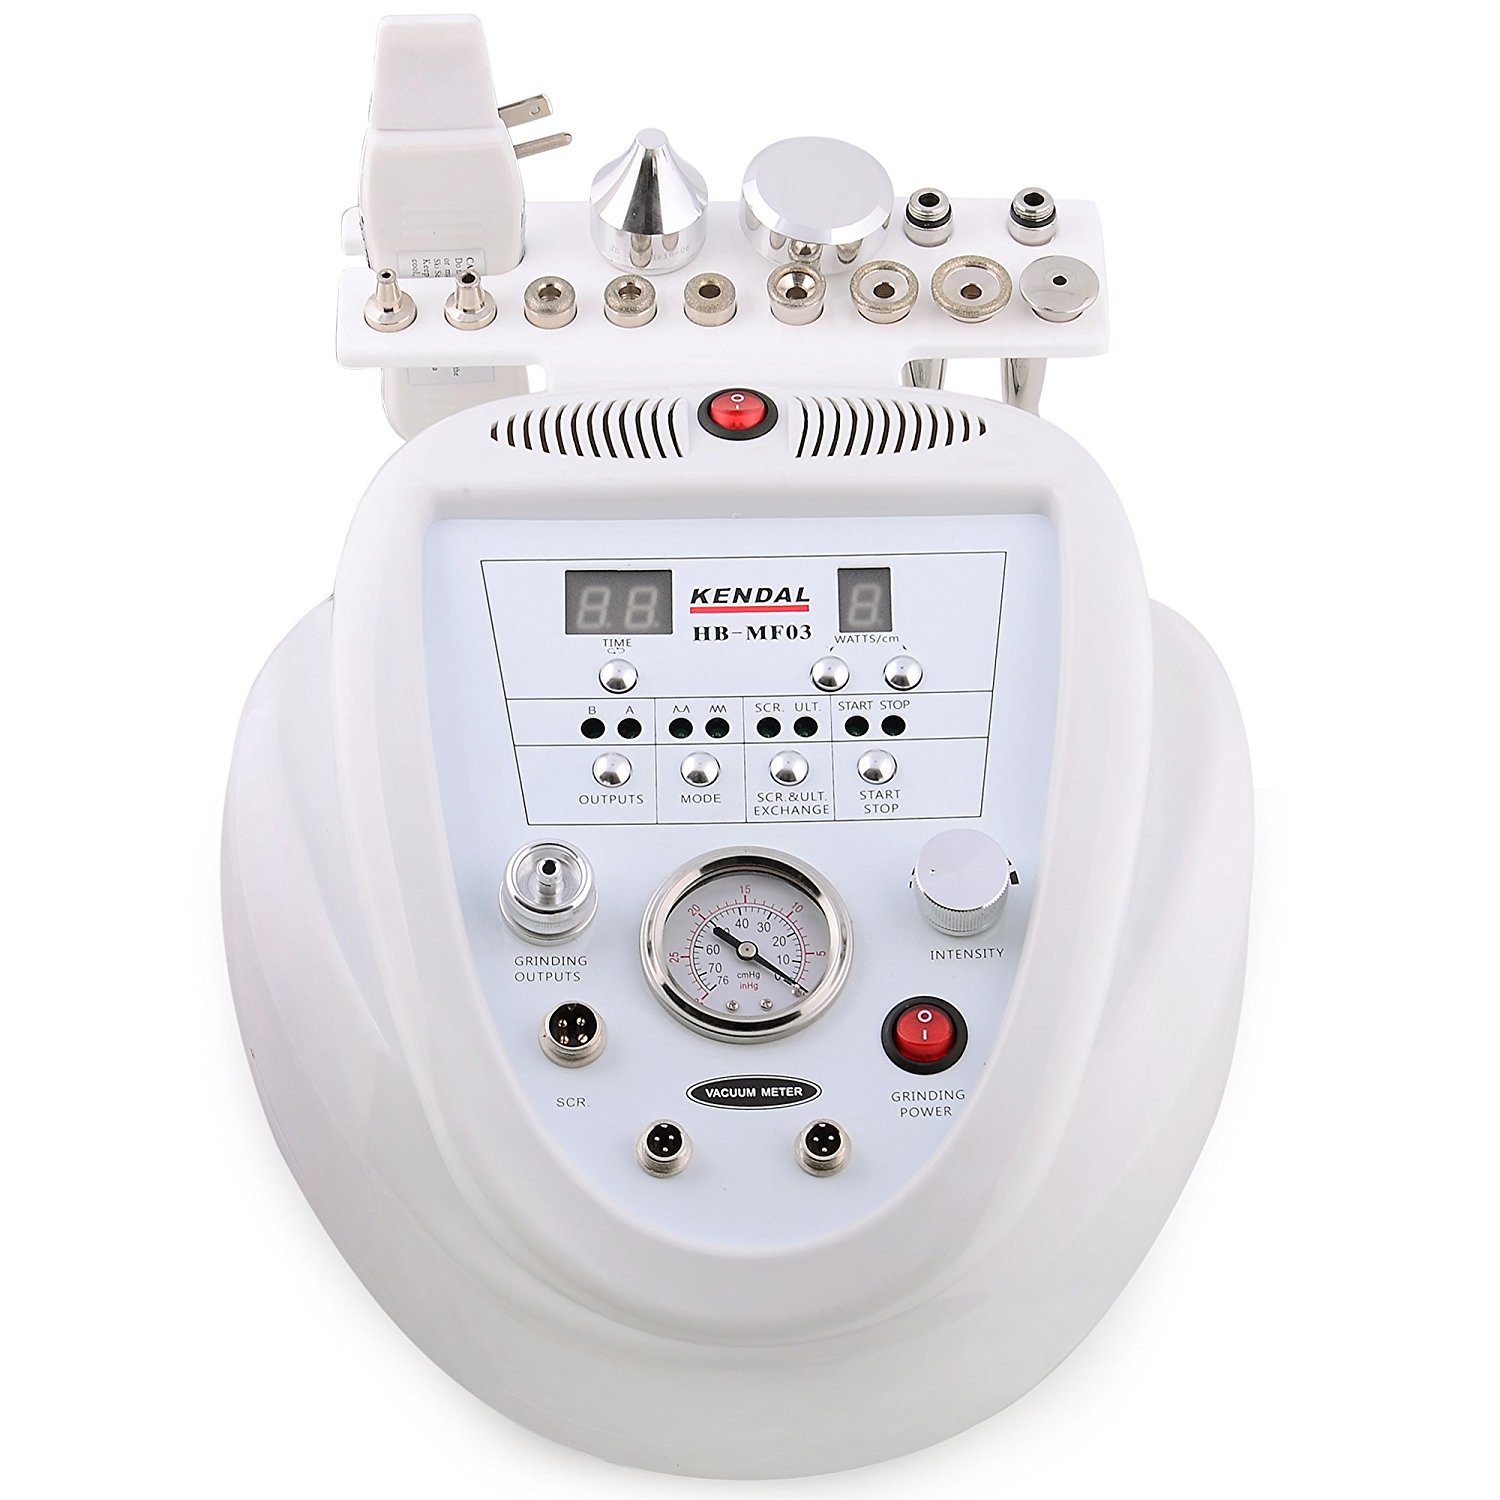 Kendal 3 in 1 Professional Diamond Microdermabrasion Machine - image 5 of 9